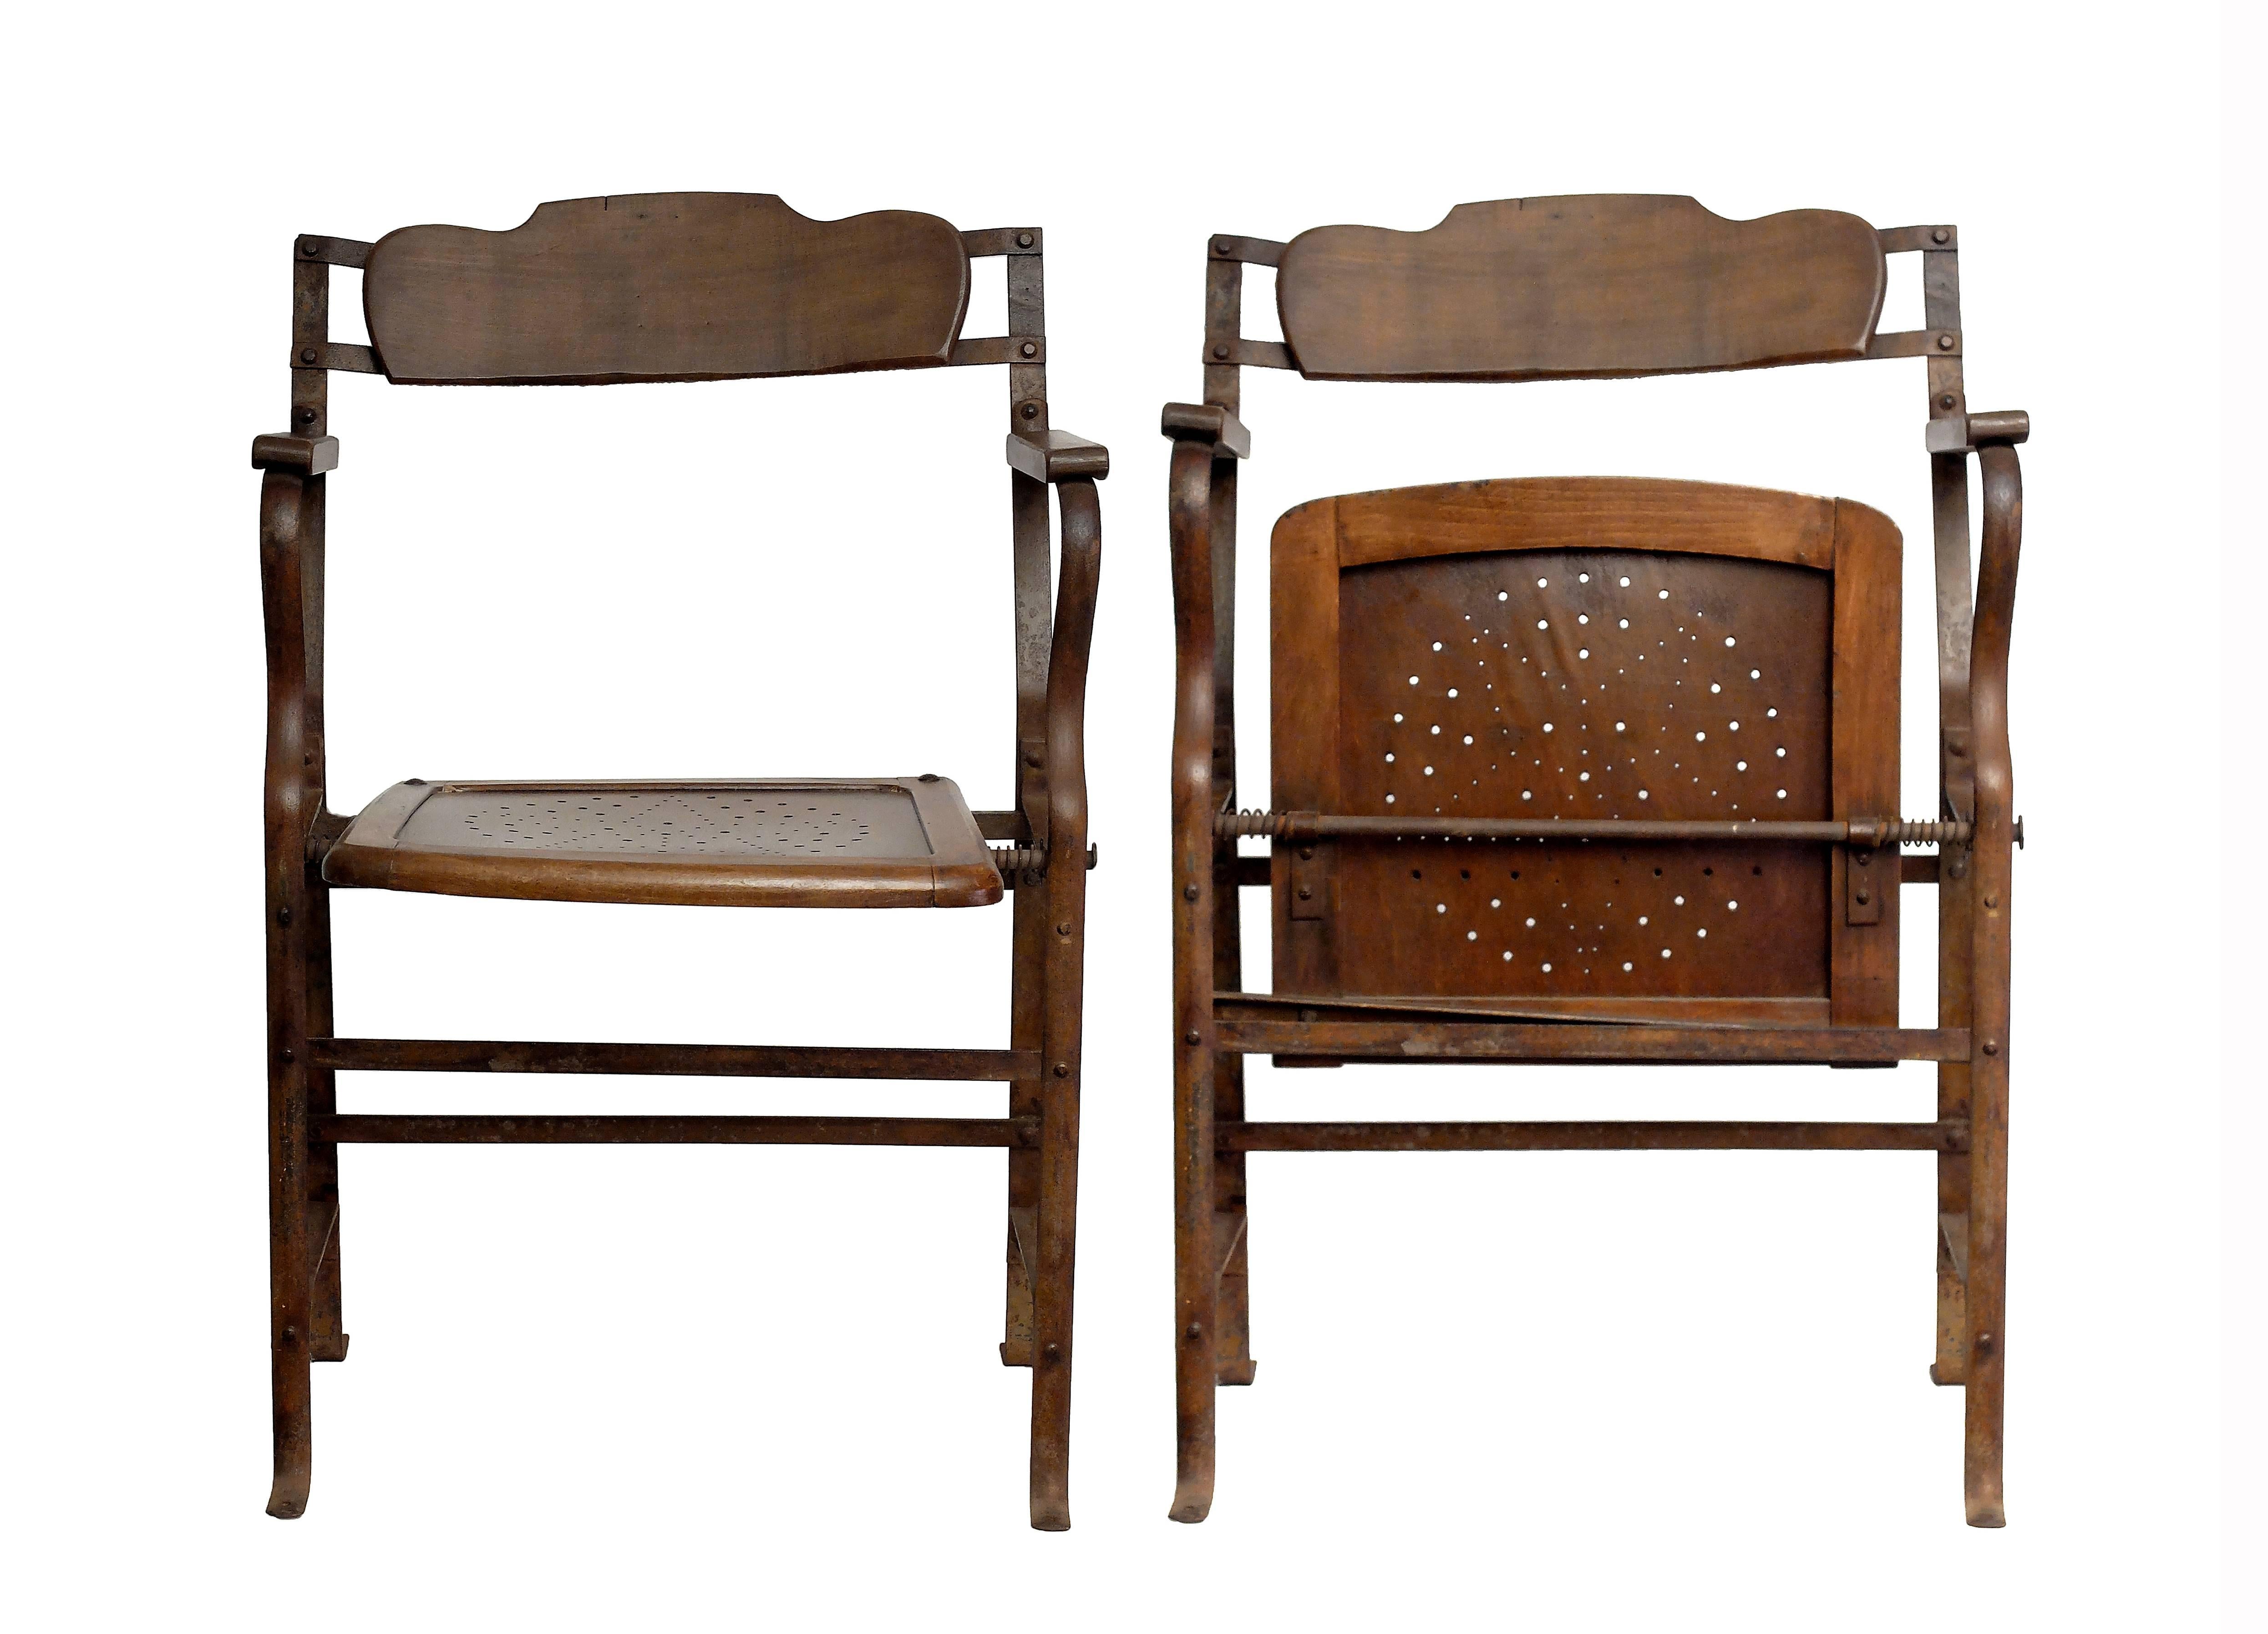 The two unusual theatre chairs are made out of wood and iron,
spring activated wooden seat and moved profile wooden backrest.
Excellent patina. France, circa 1920. Sold also separately. Price is intended per one chair.